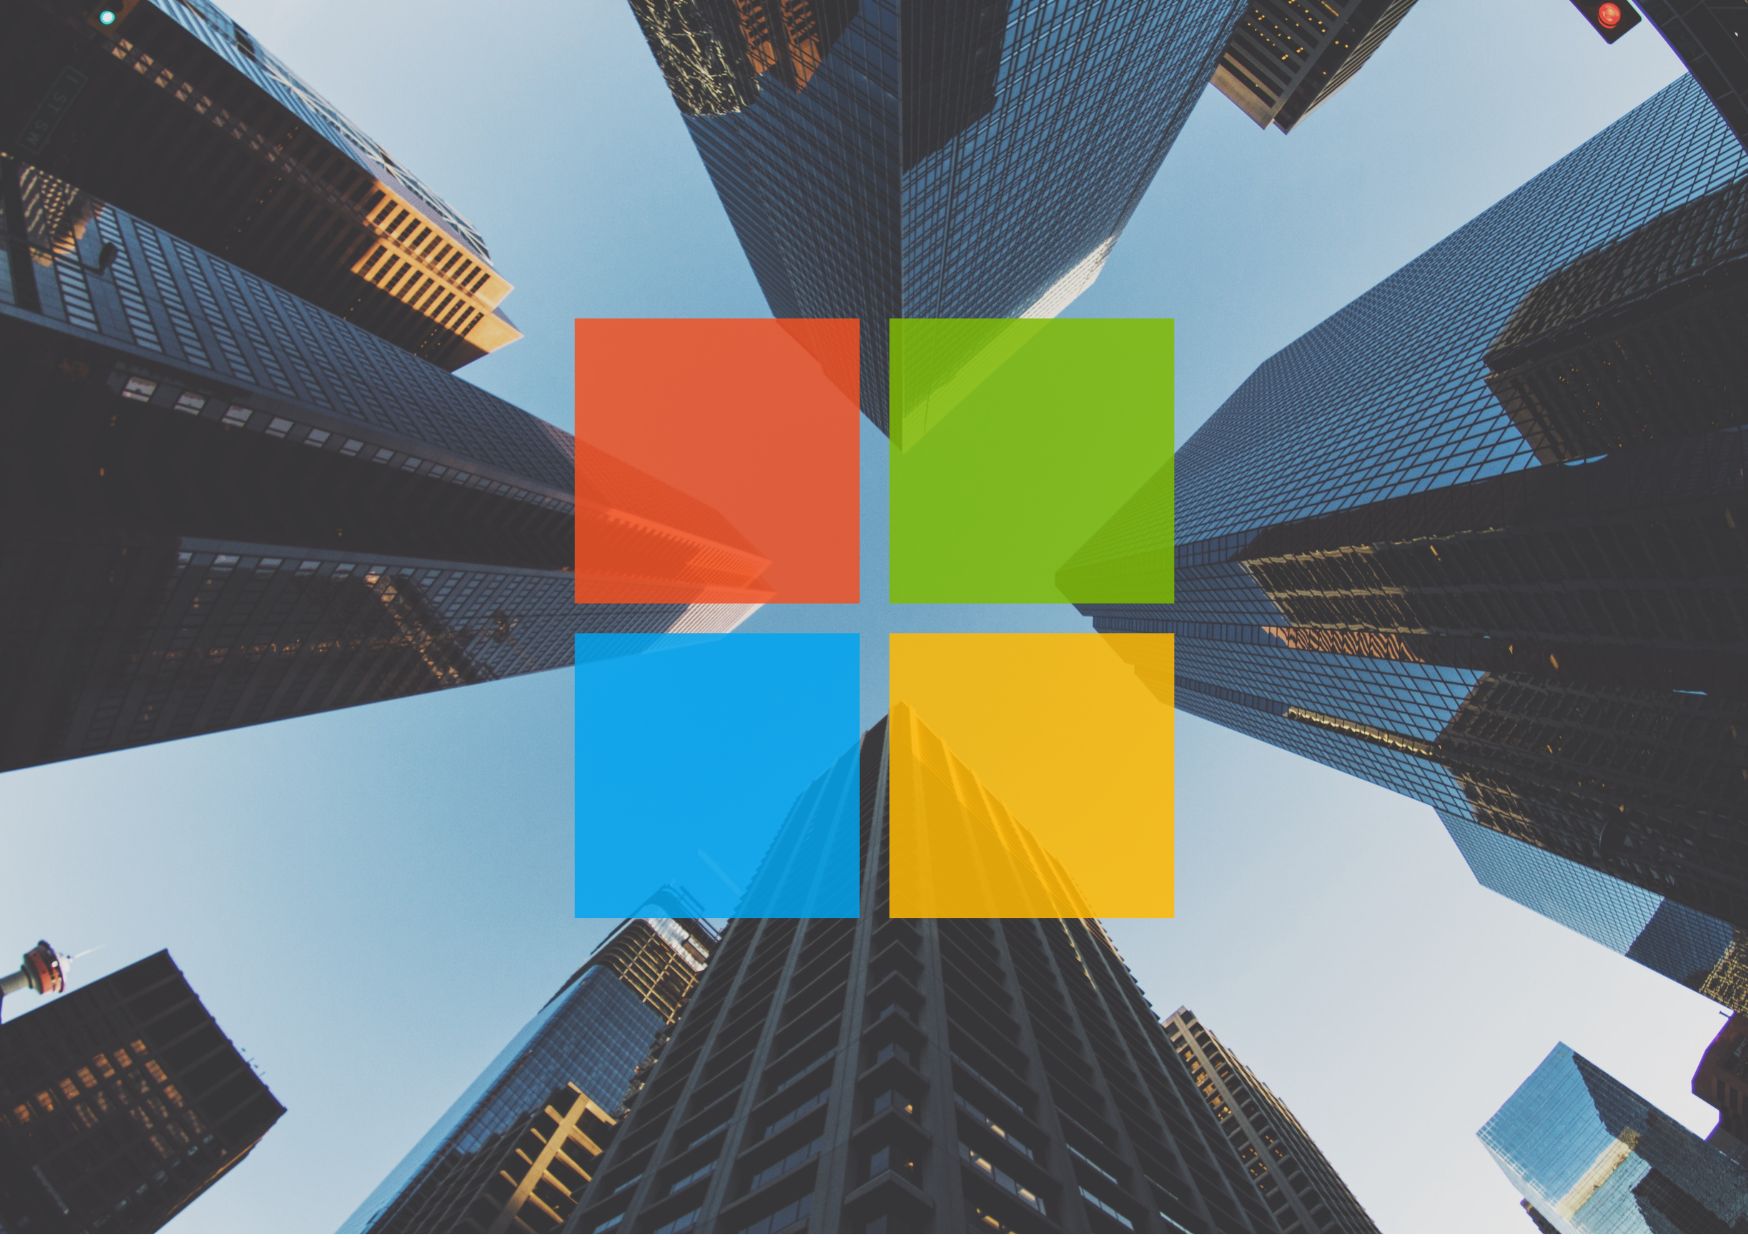 Featured image: windows logo imposed over city buildings - Read full post: Microsoft announces Windows 11, here’s what you need to know.